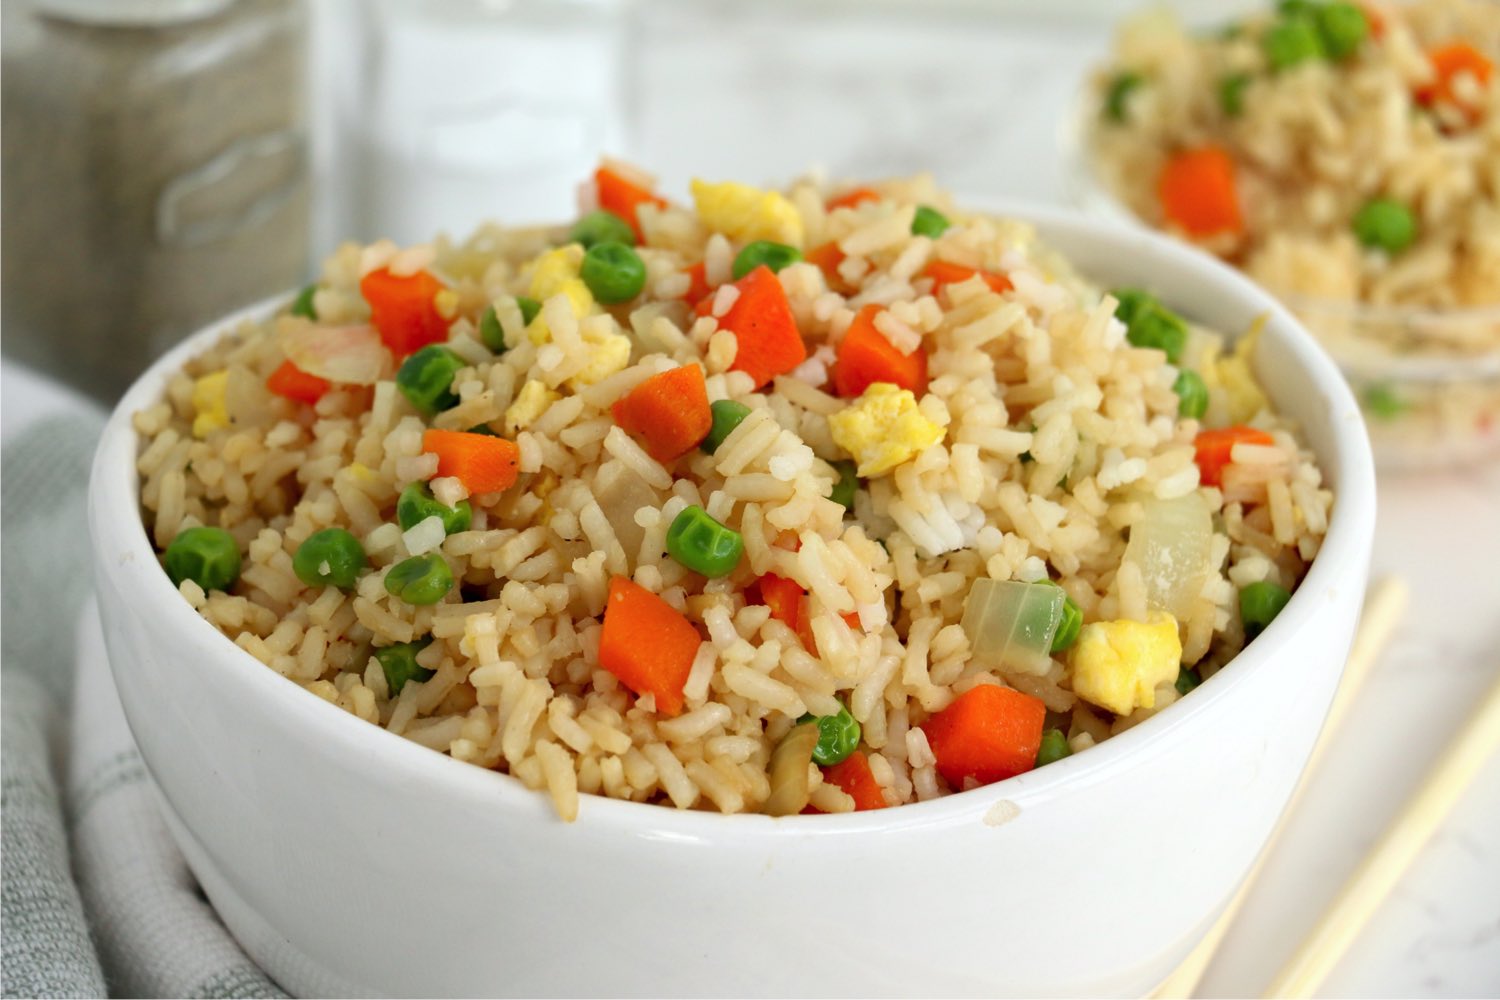 white bowl filled with fried rice and vegetables